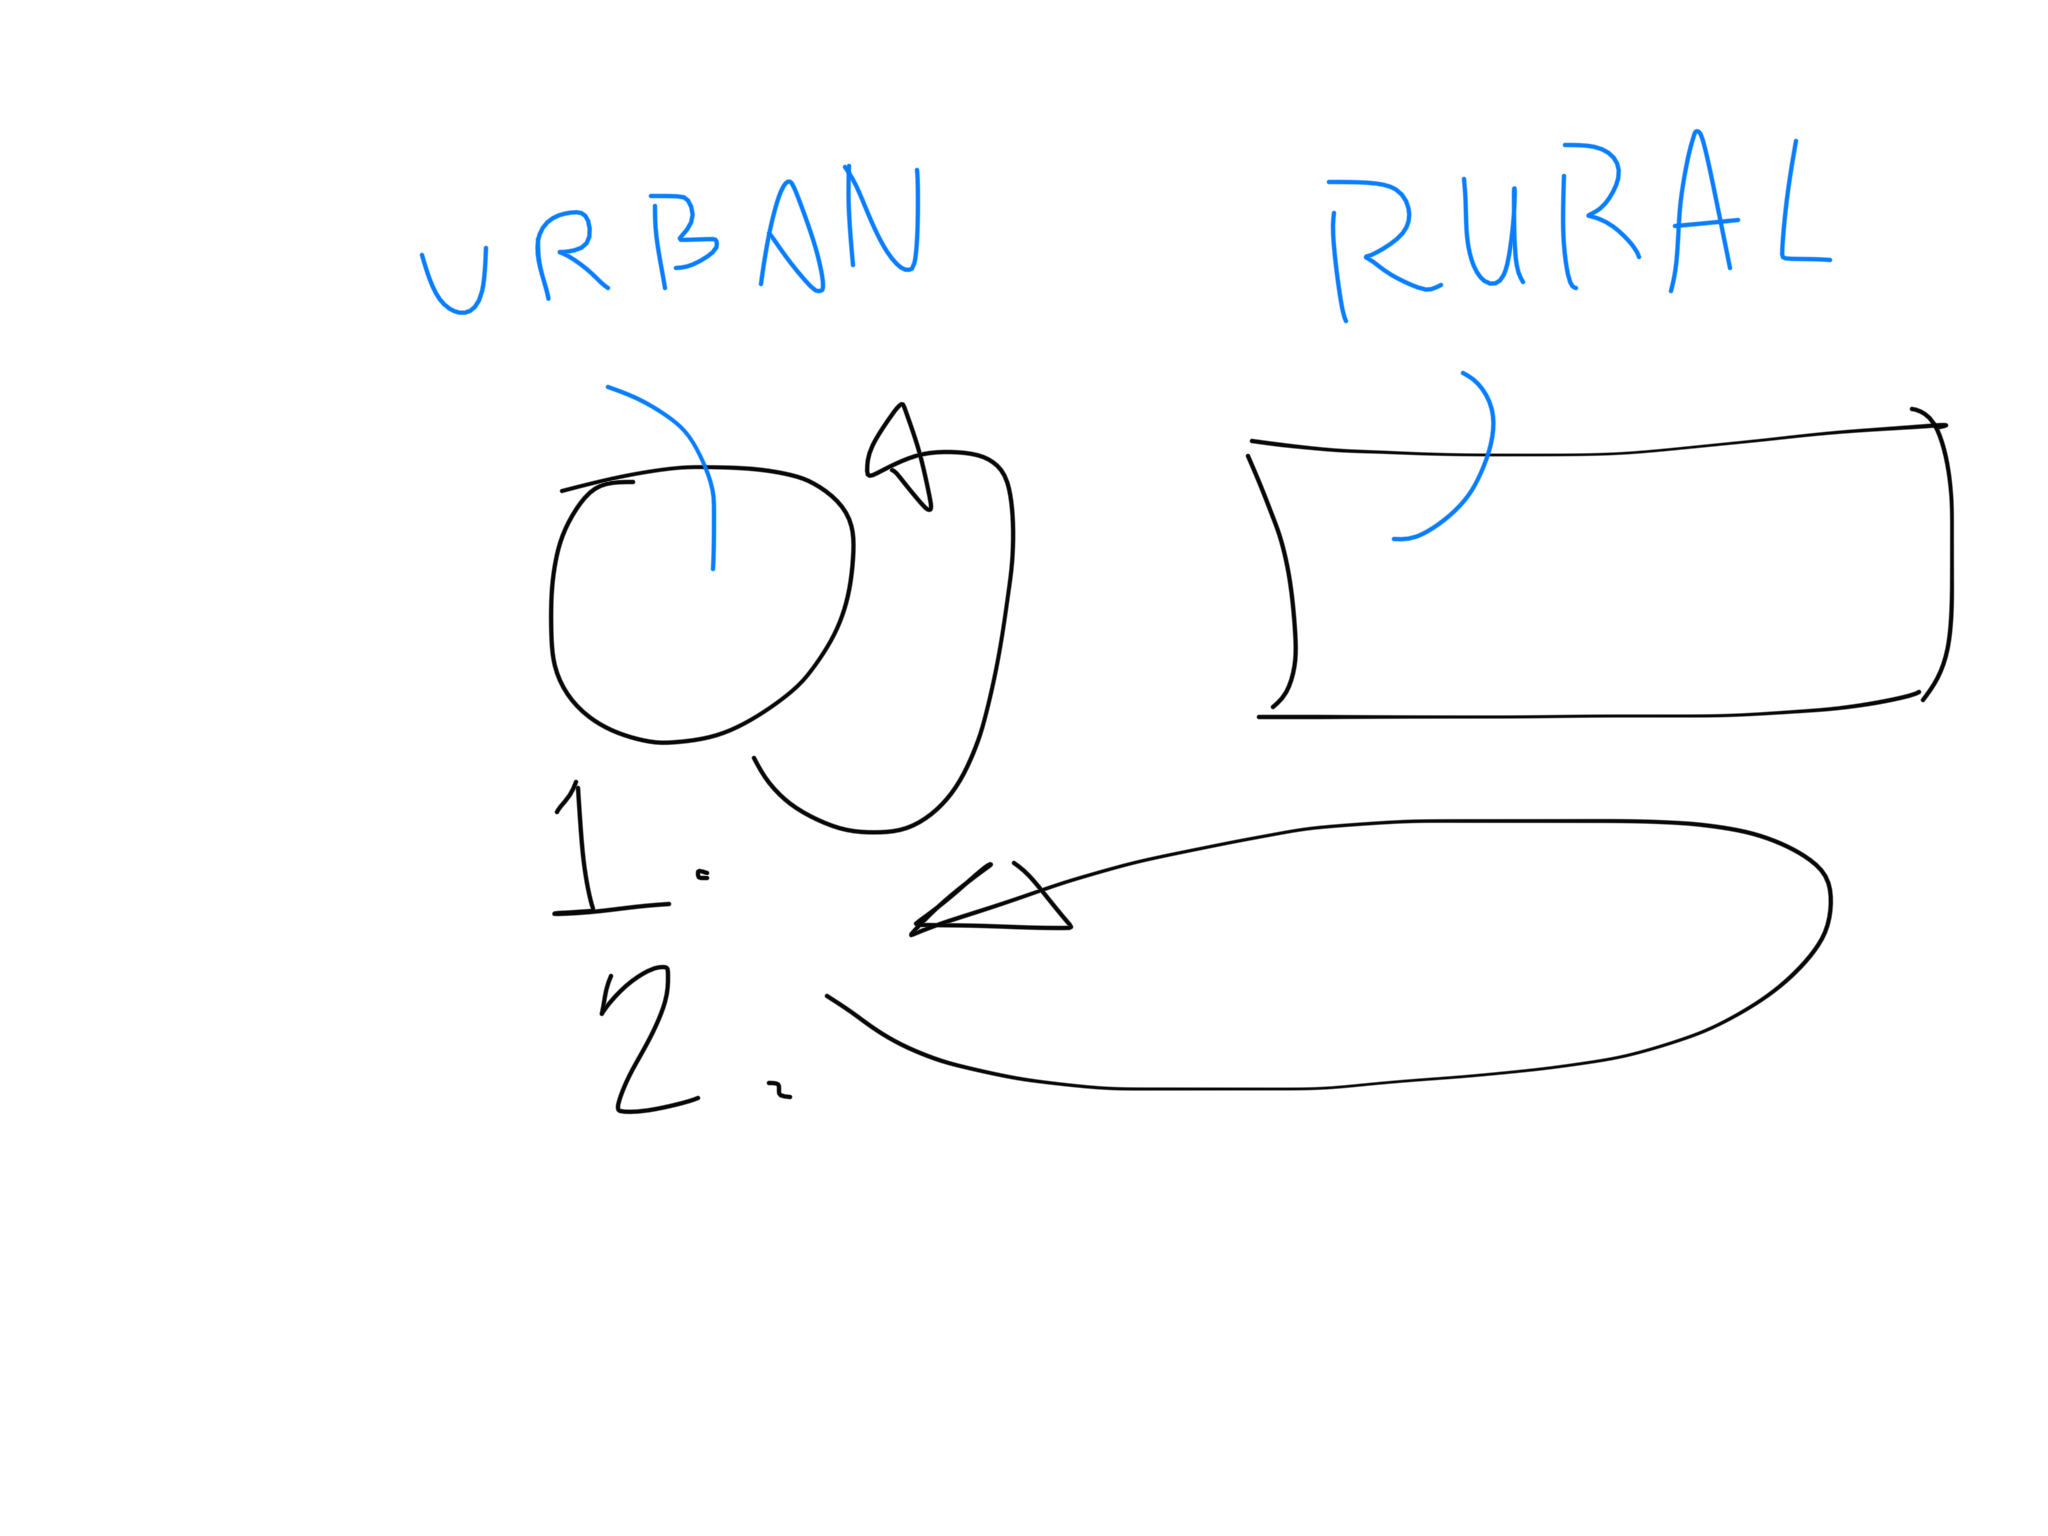 Urban and Rural relationship